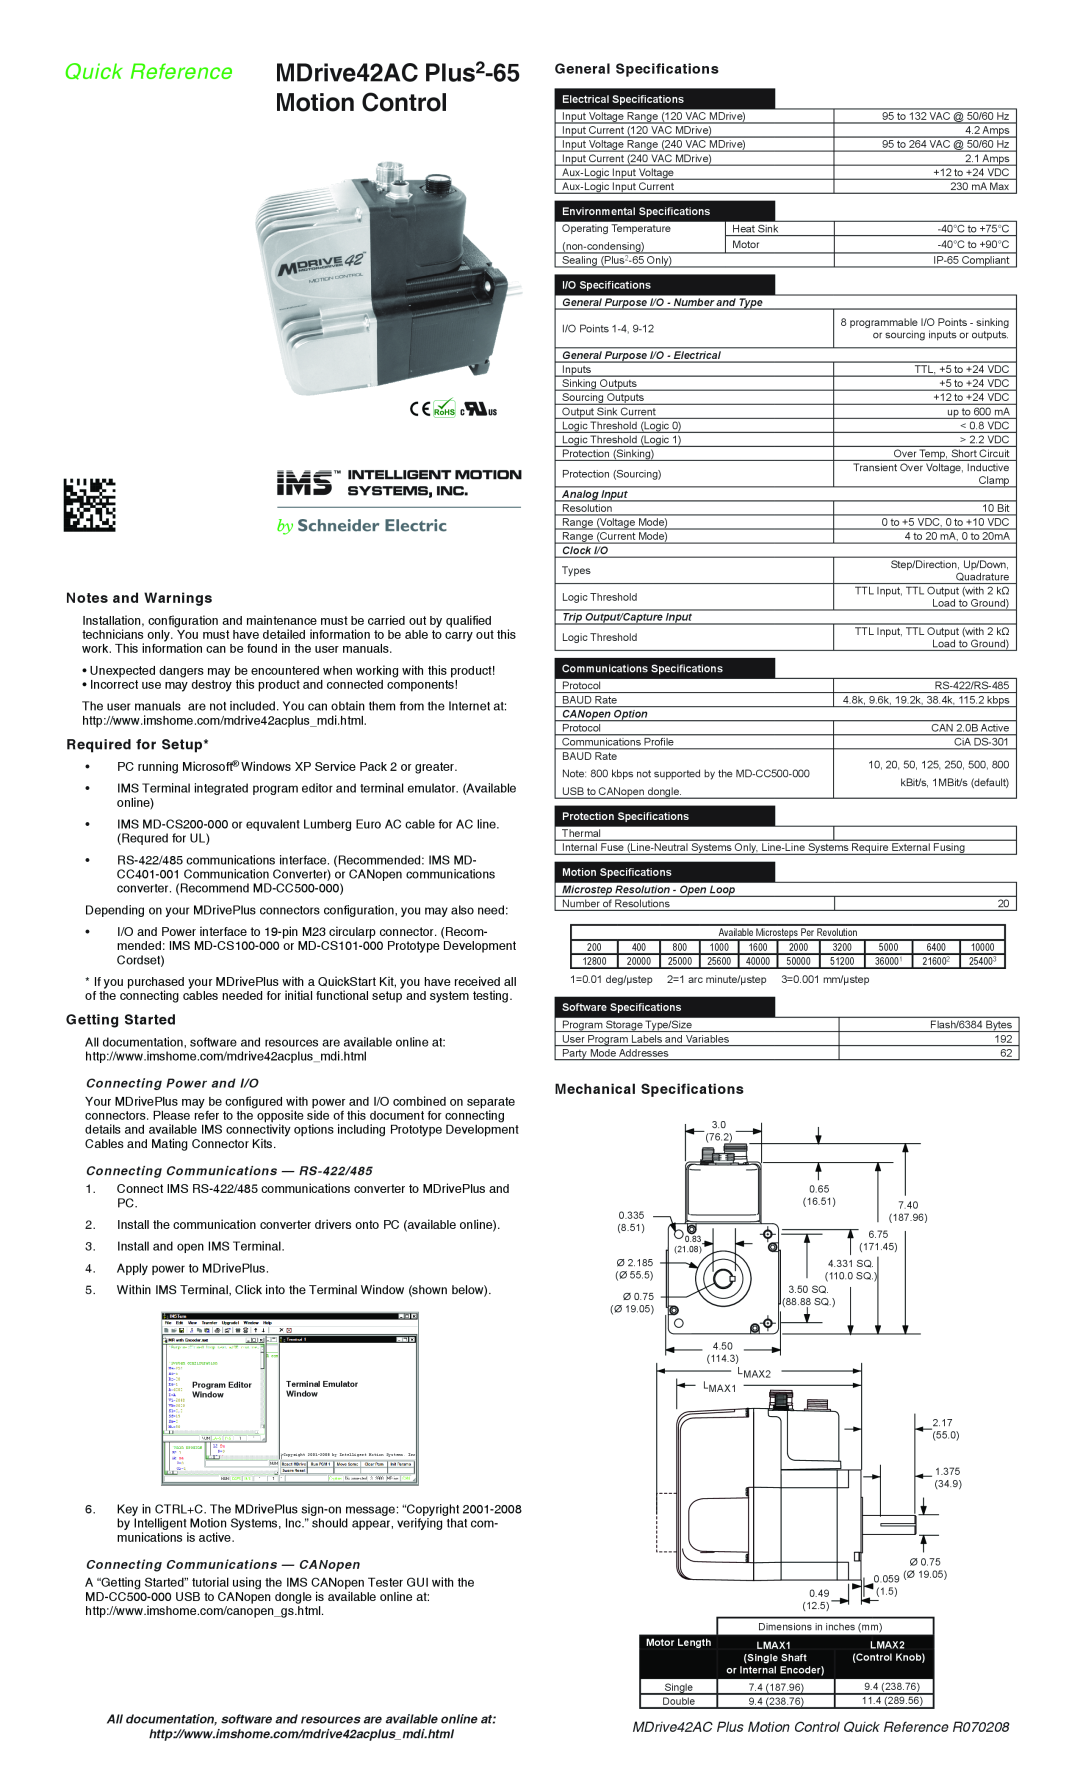 Intelligent Motion Systems MDrive42AC specifications Notes and Warnings, Required for Setup, Getting Started 